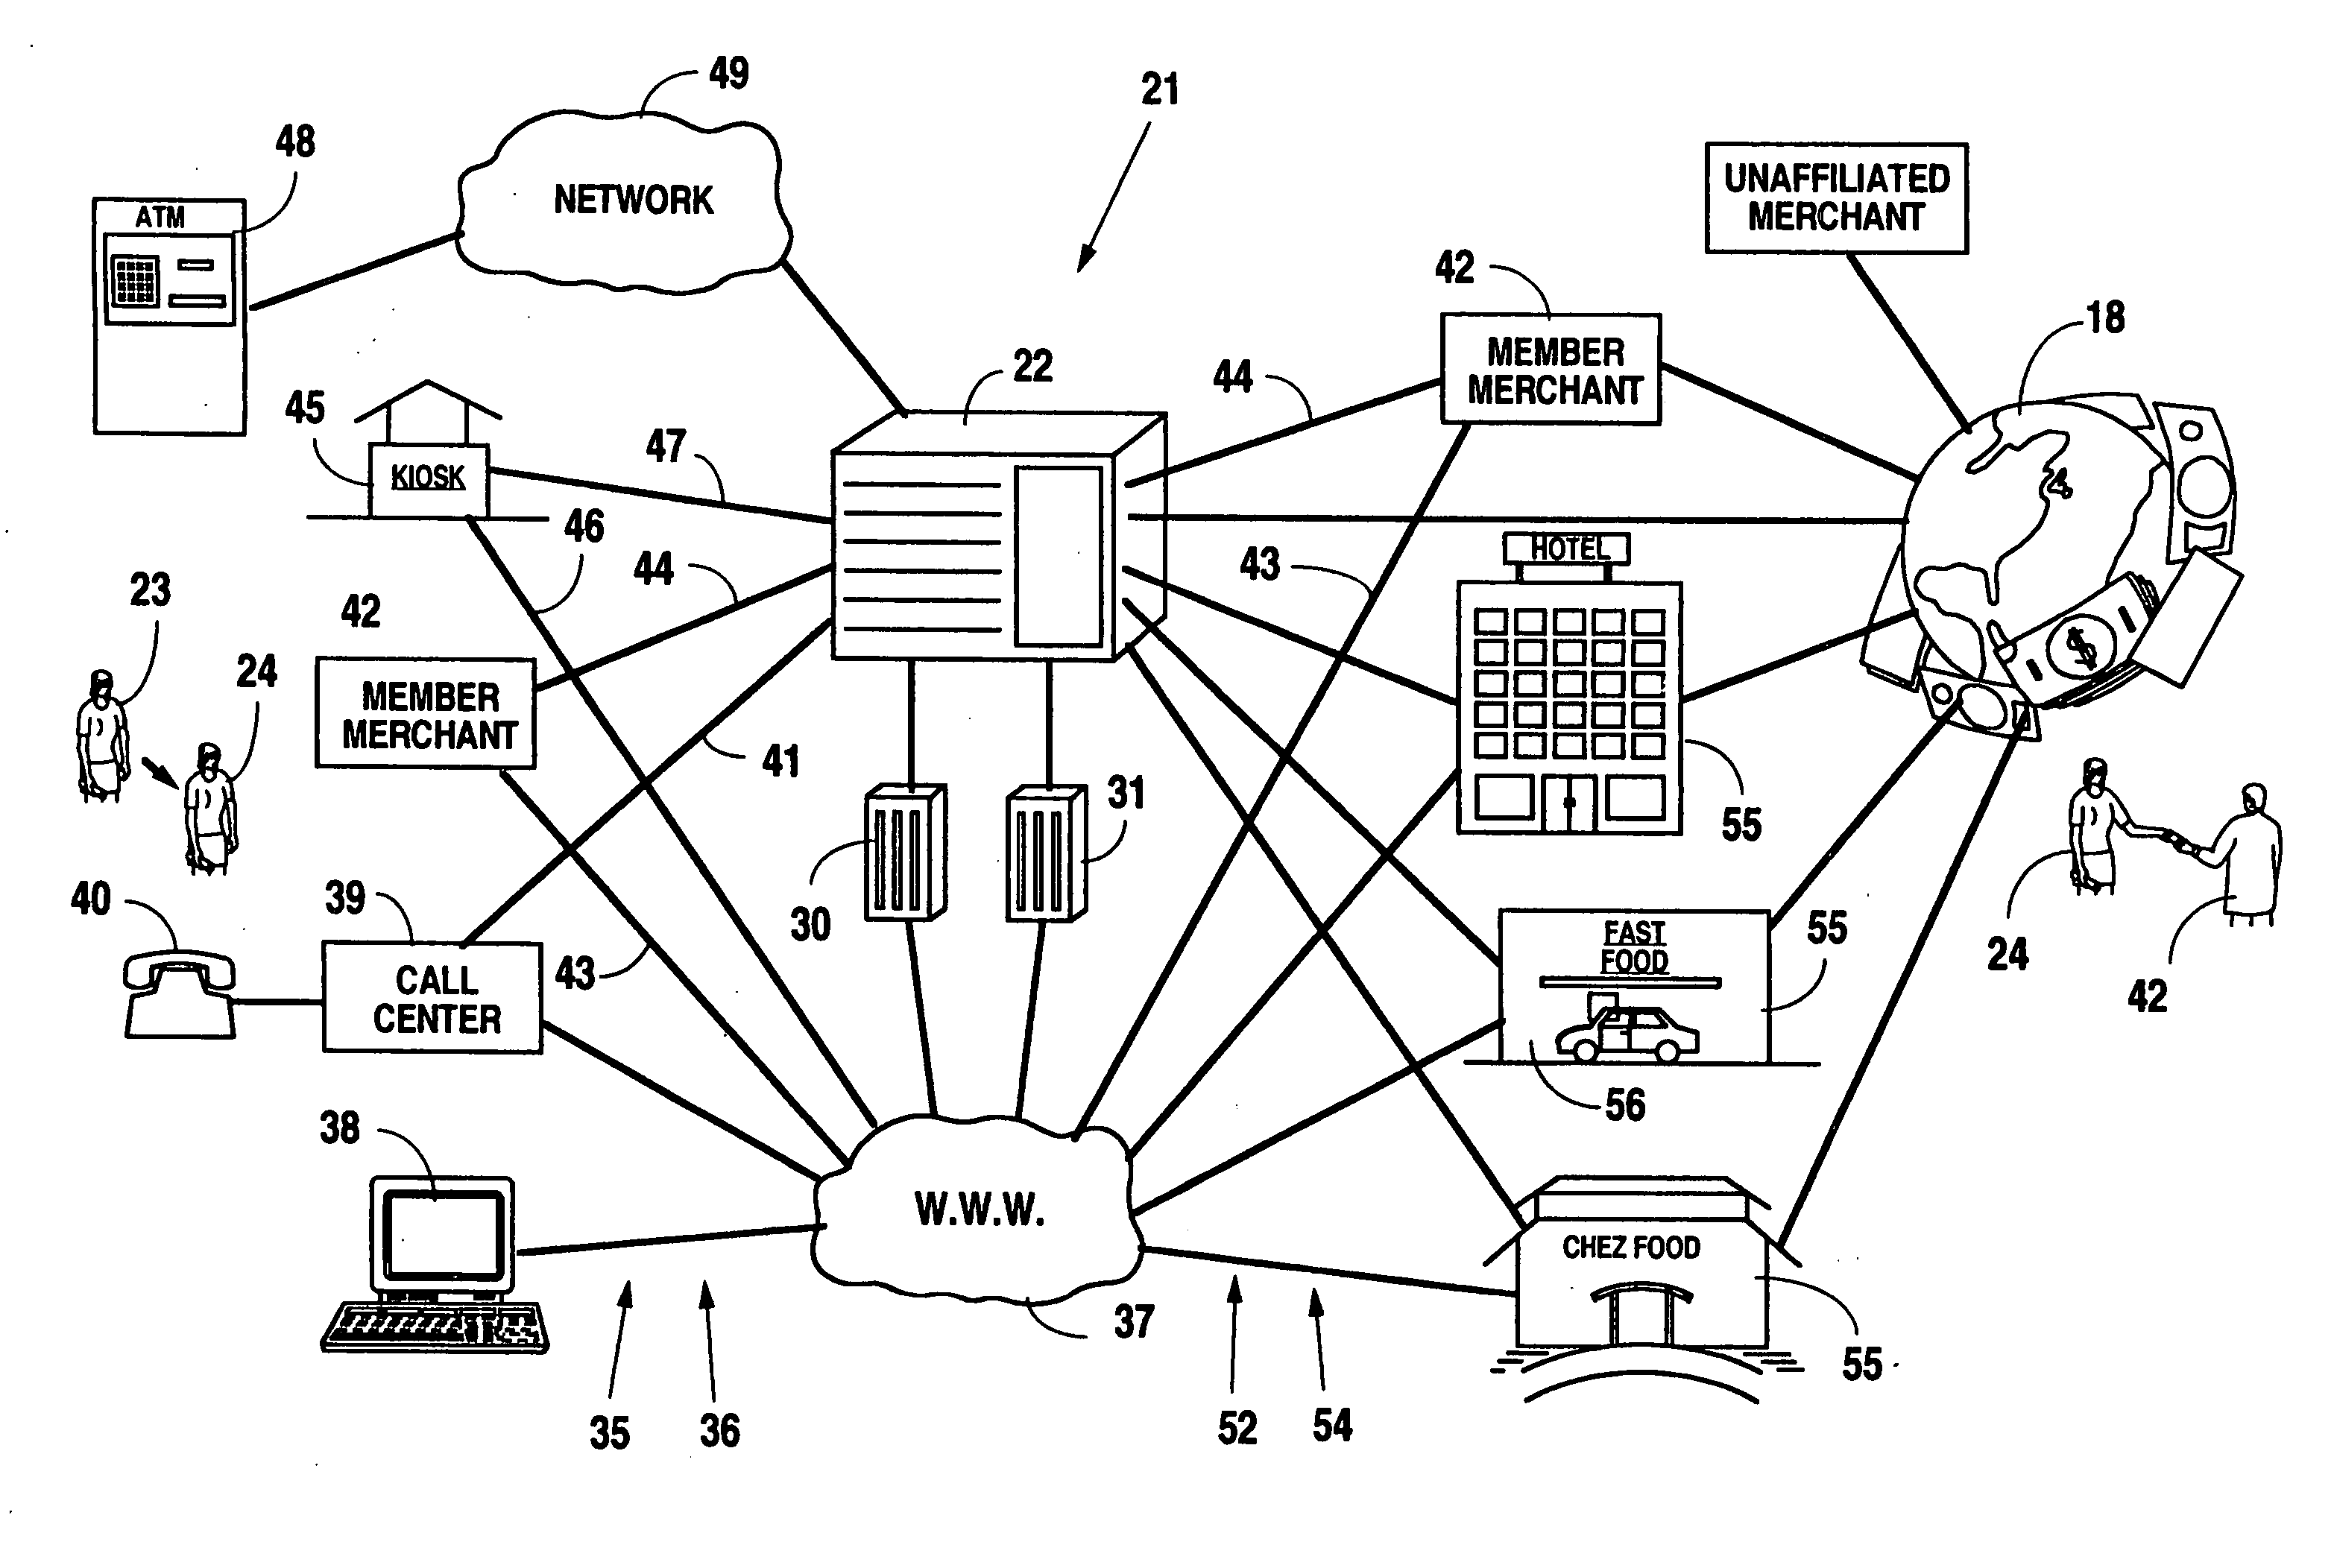 Network topology for processing consumer financial transactions